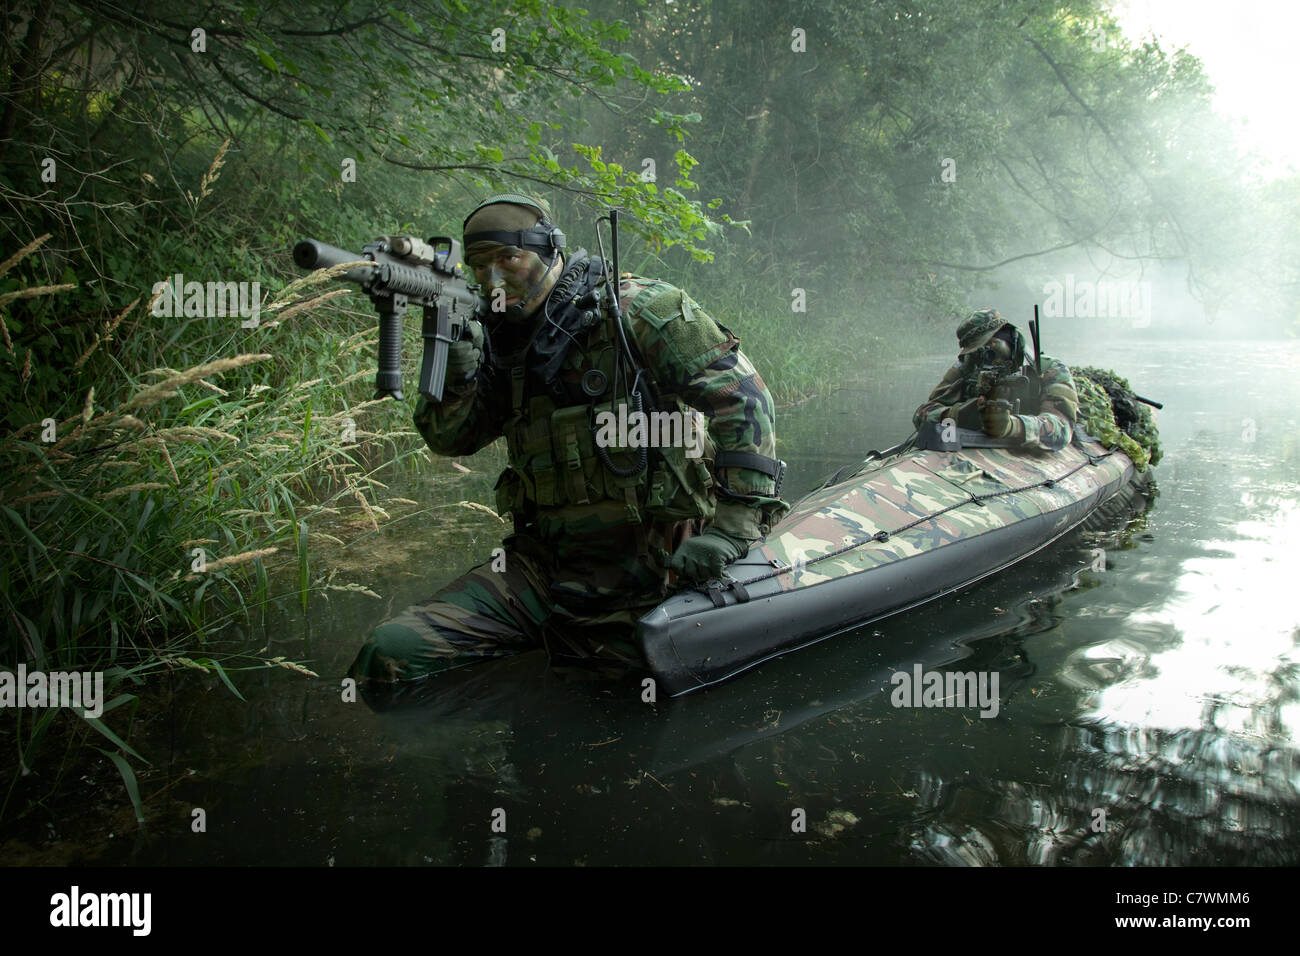 Navy SEALs navigate the waters in a folding kayak during jungle warfare operations. Stock Photo